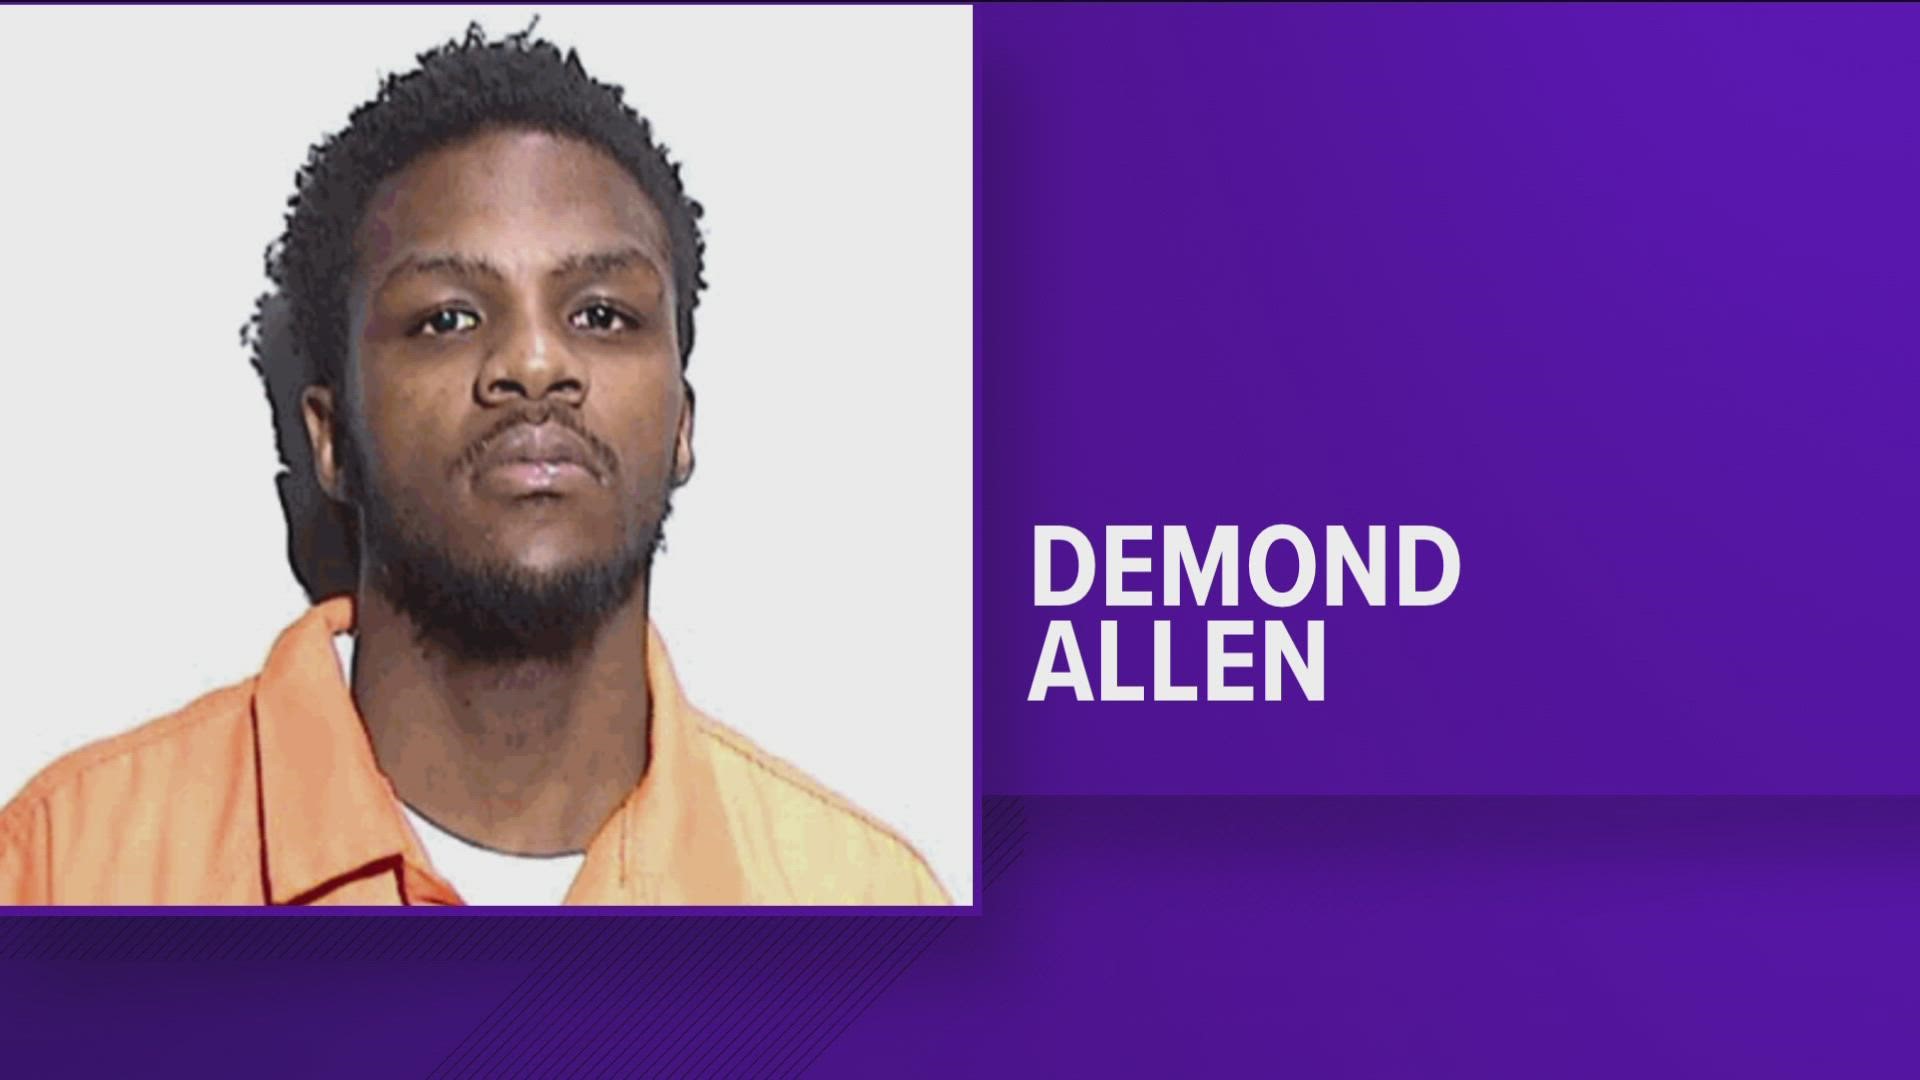 Steven Weaver, 22, and Demond Allen, 21, have been charged with the murder of 28-year-old Catherine Craig. Allen was arrested Monday morning.